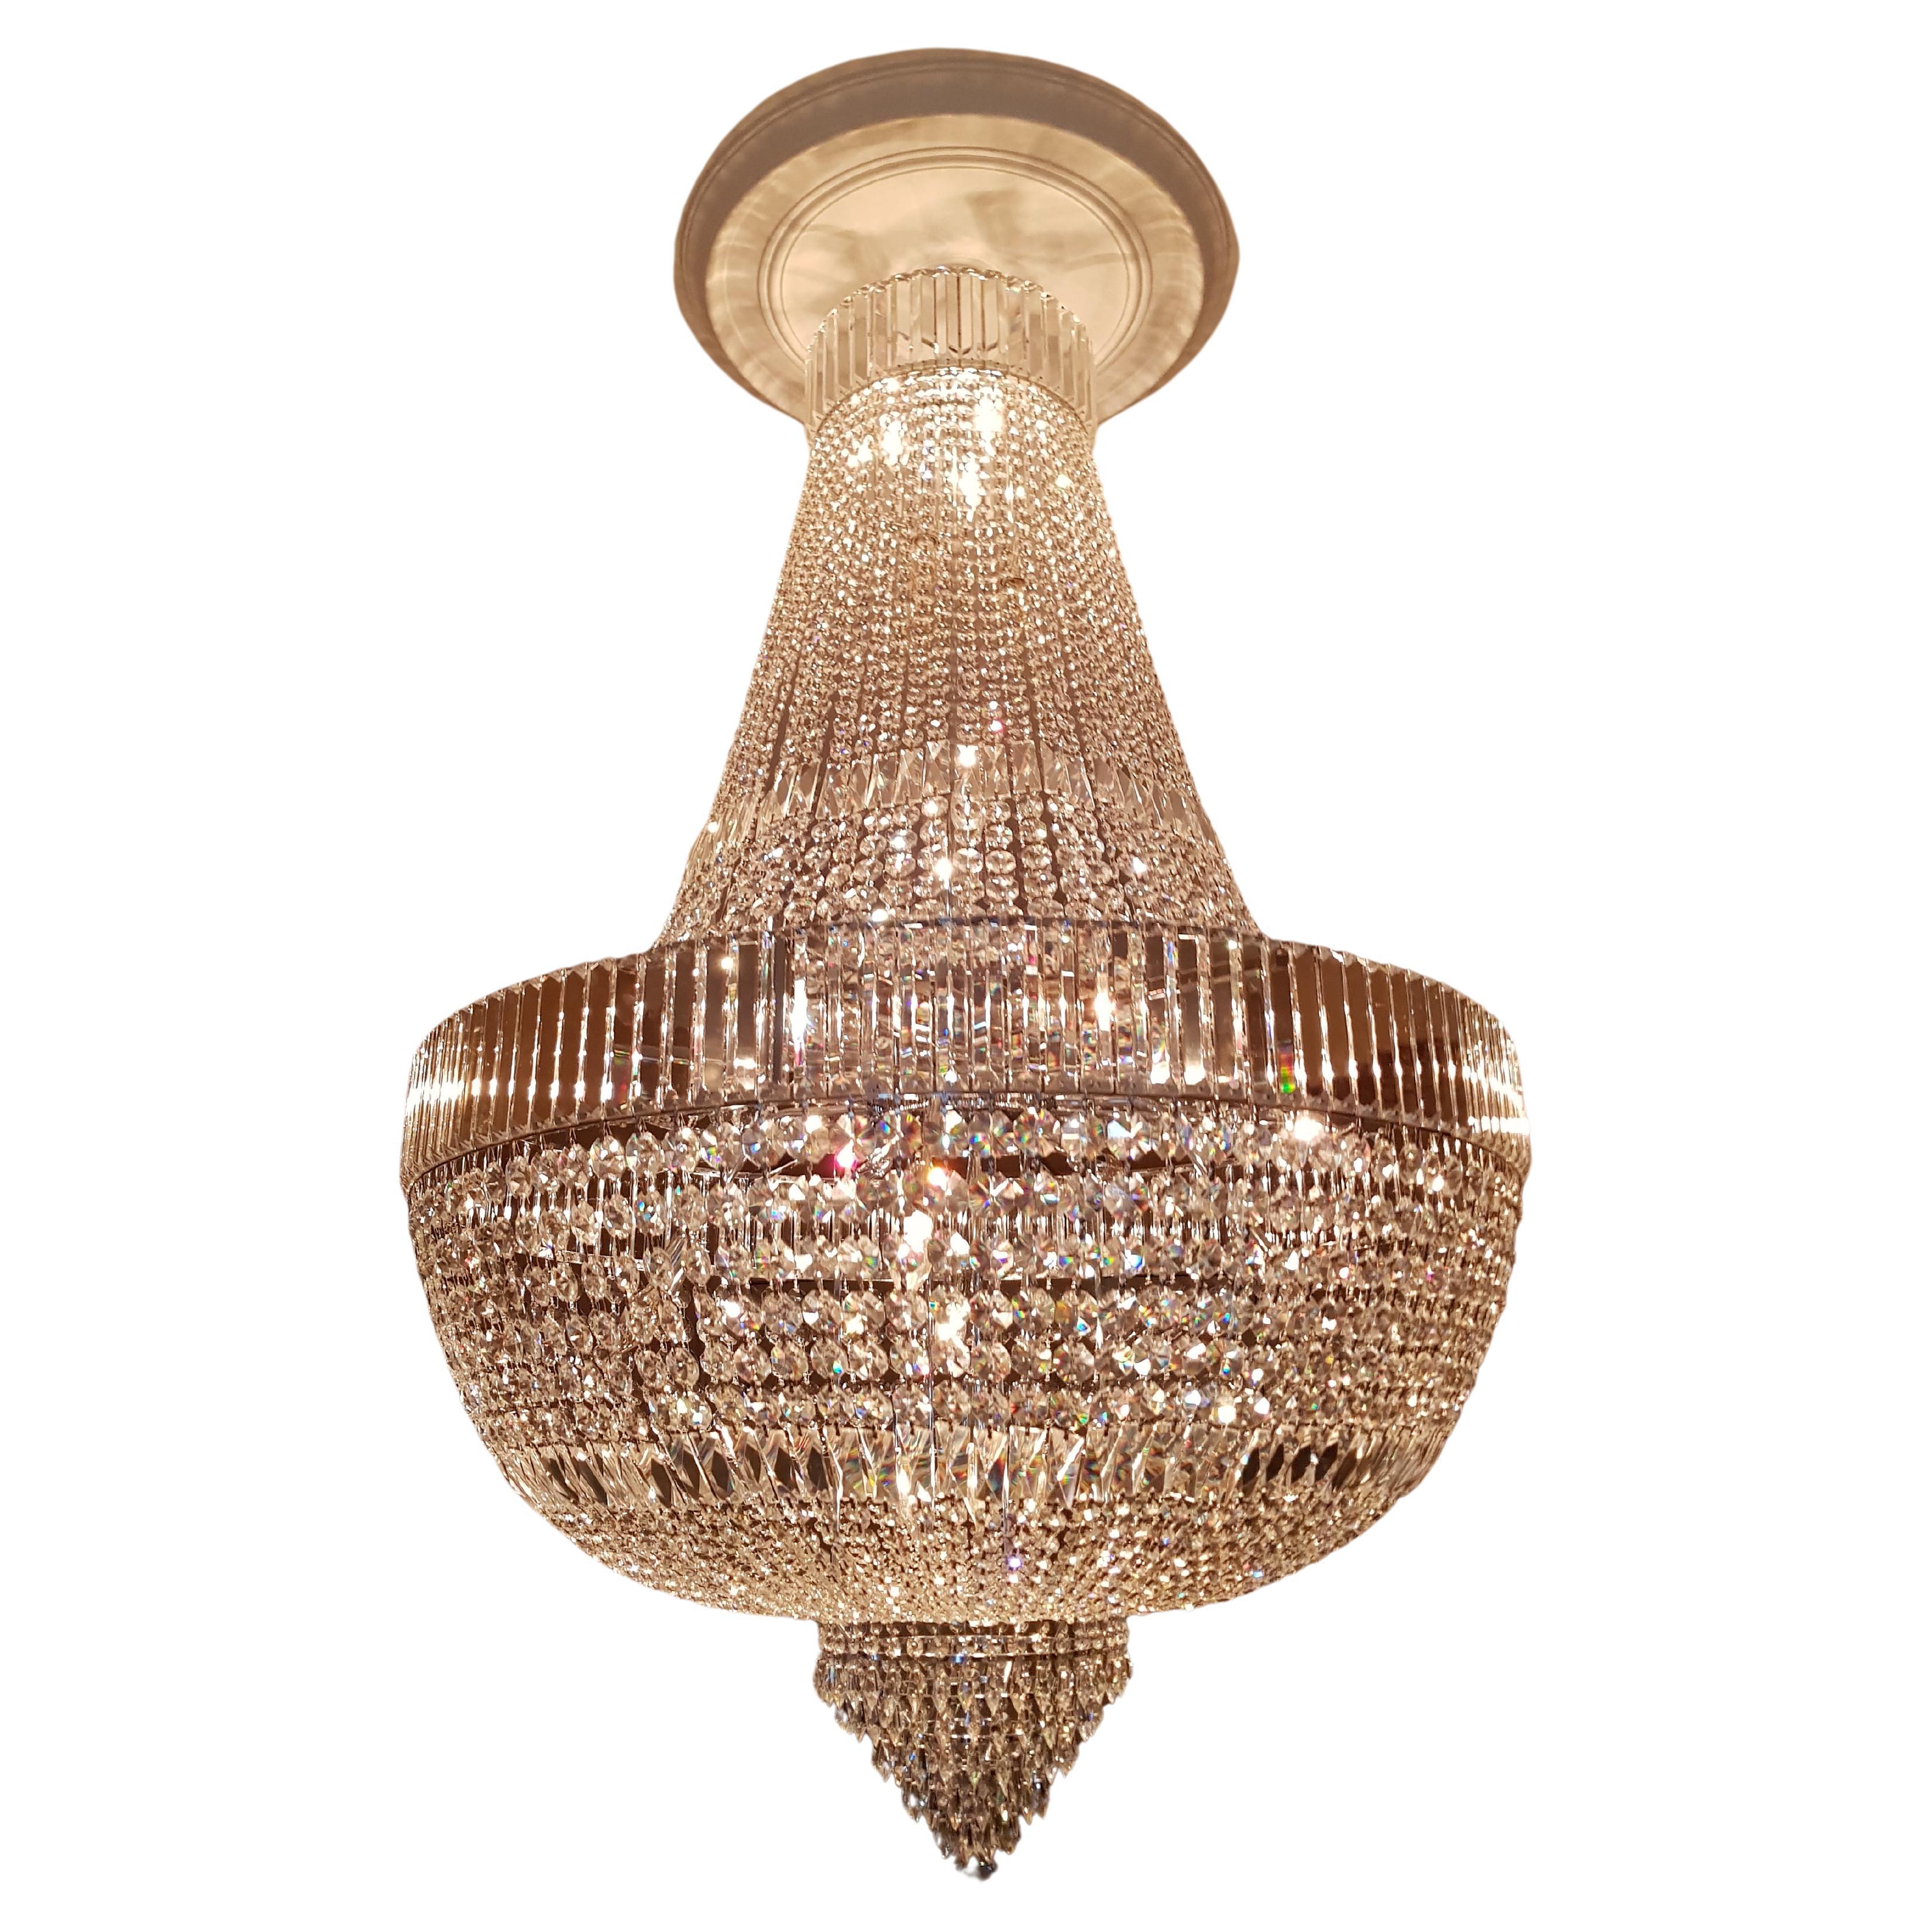 Art Deco Crystal Chandelier Empire Sac a Pearl Palace Lamp Chrome For Sale